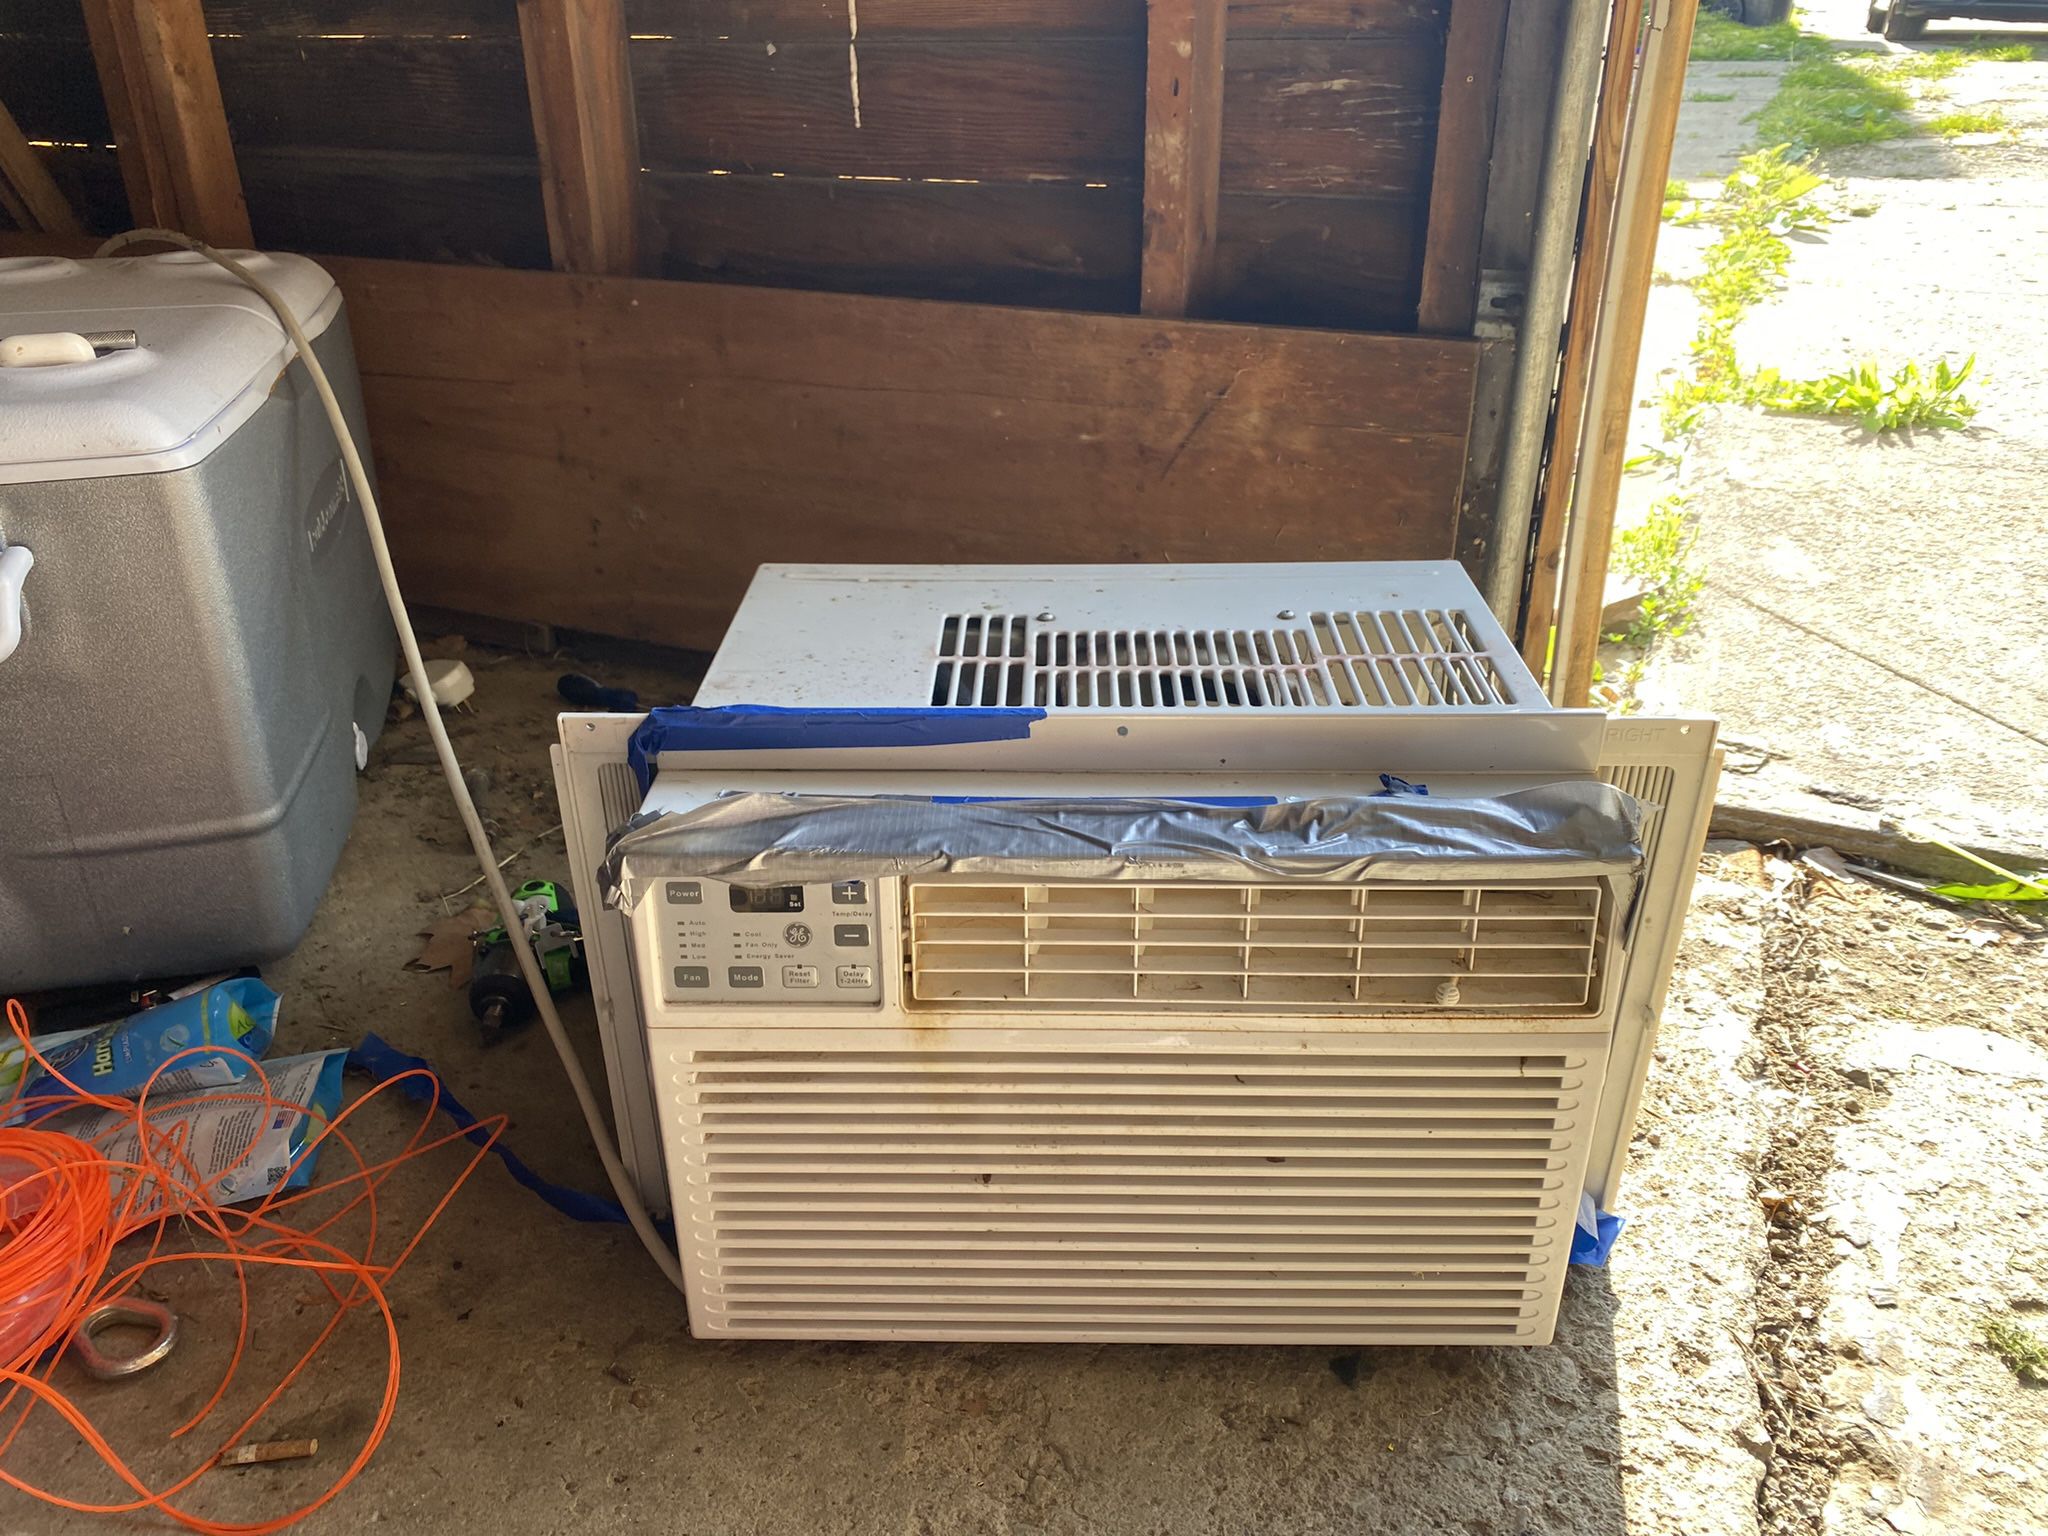 Window air Conditioners 